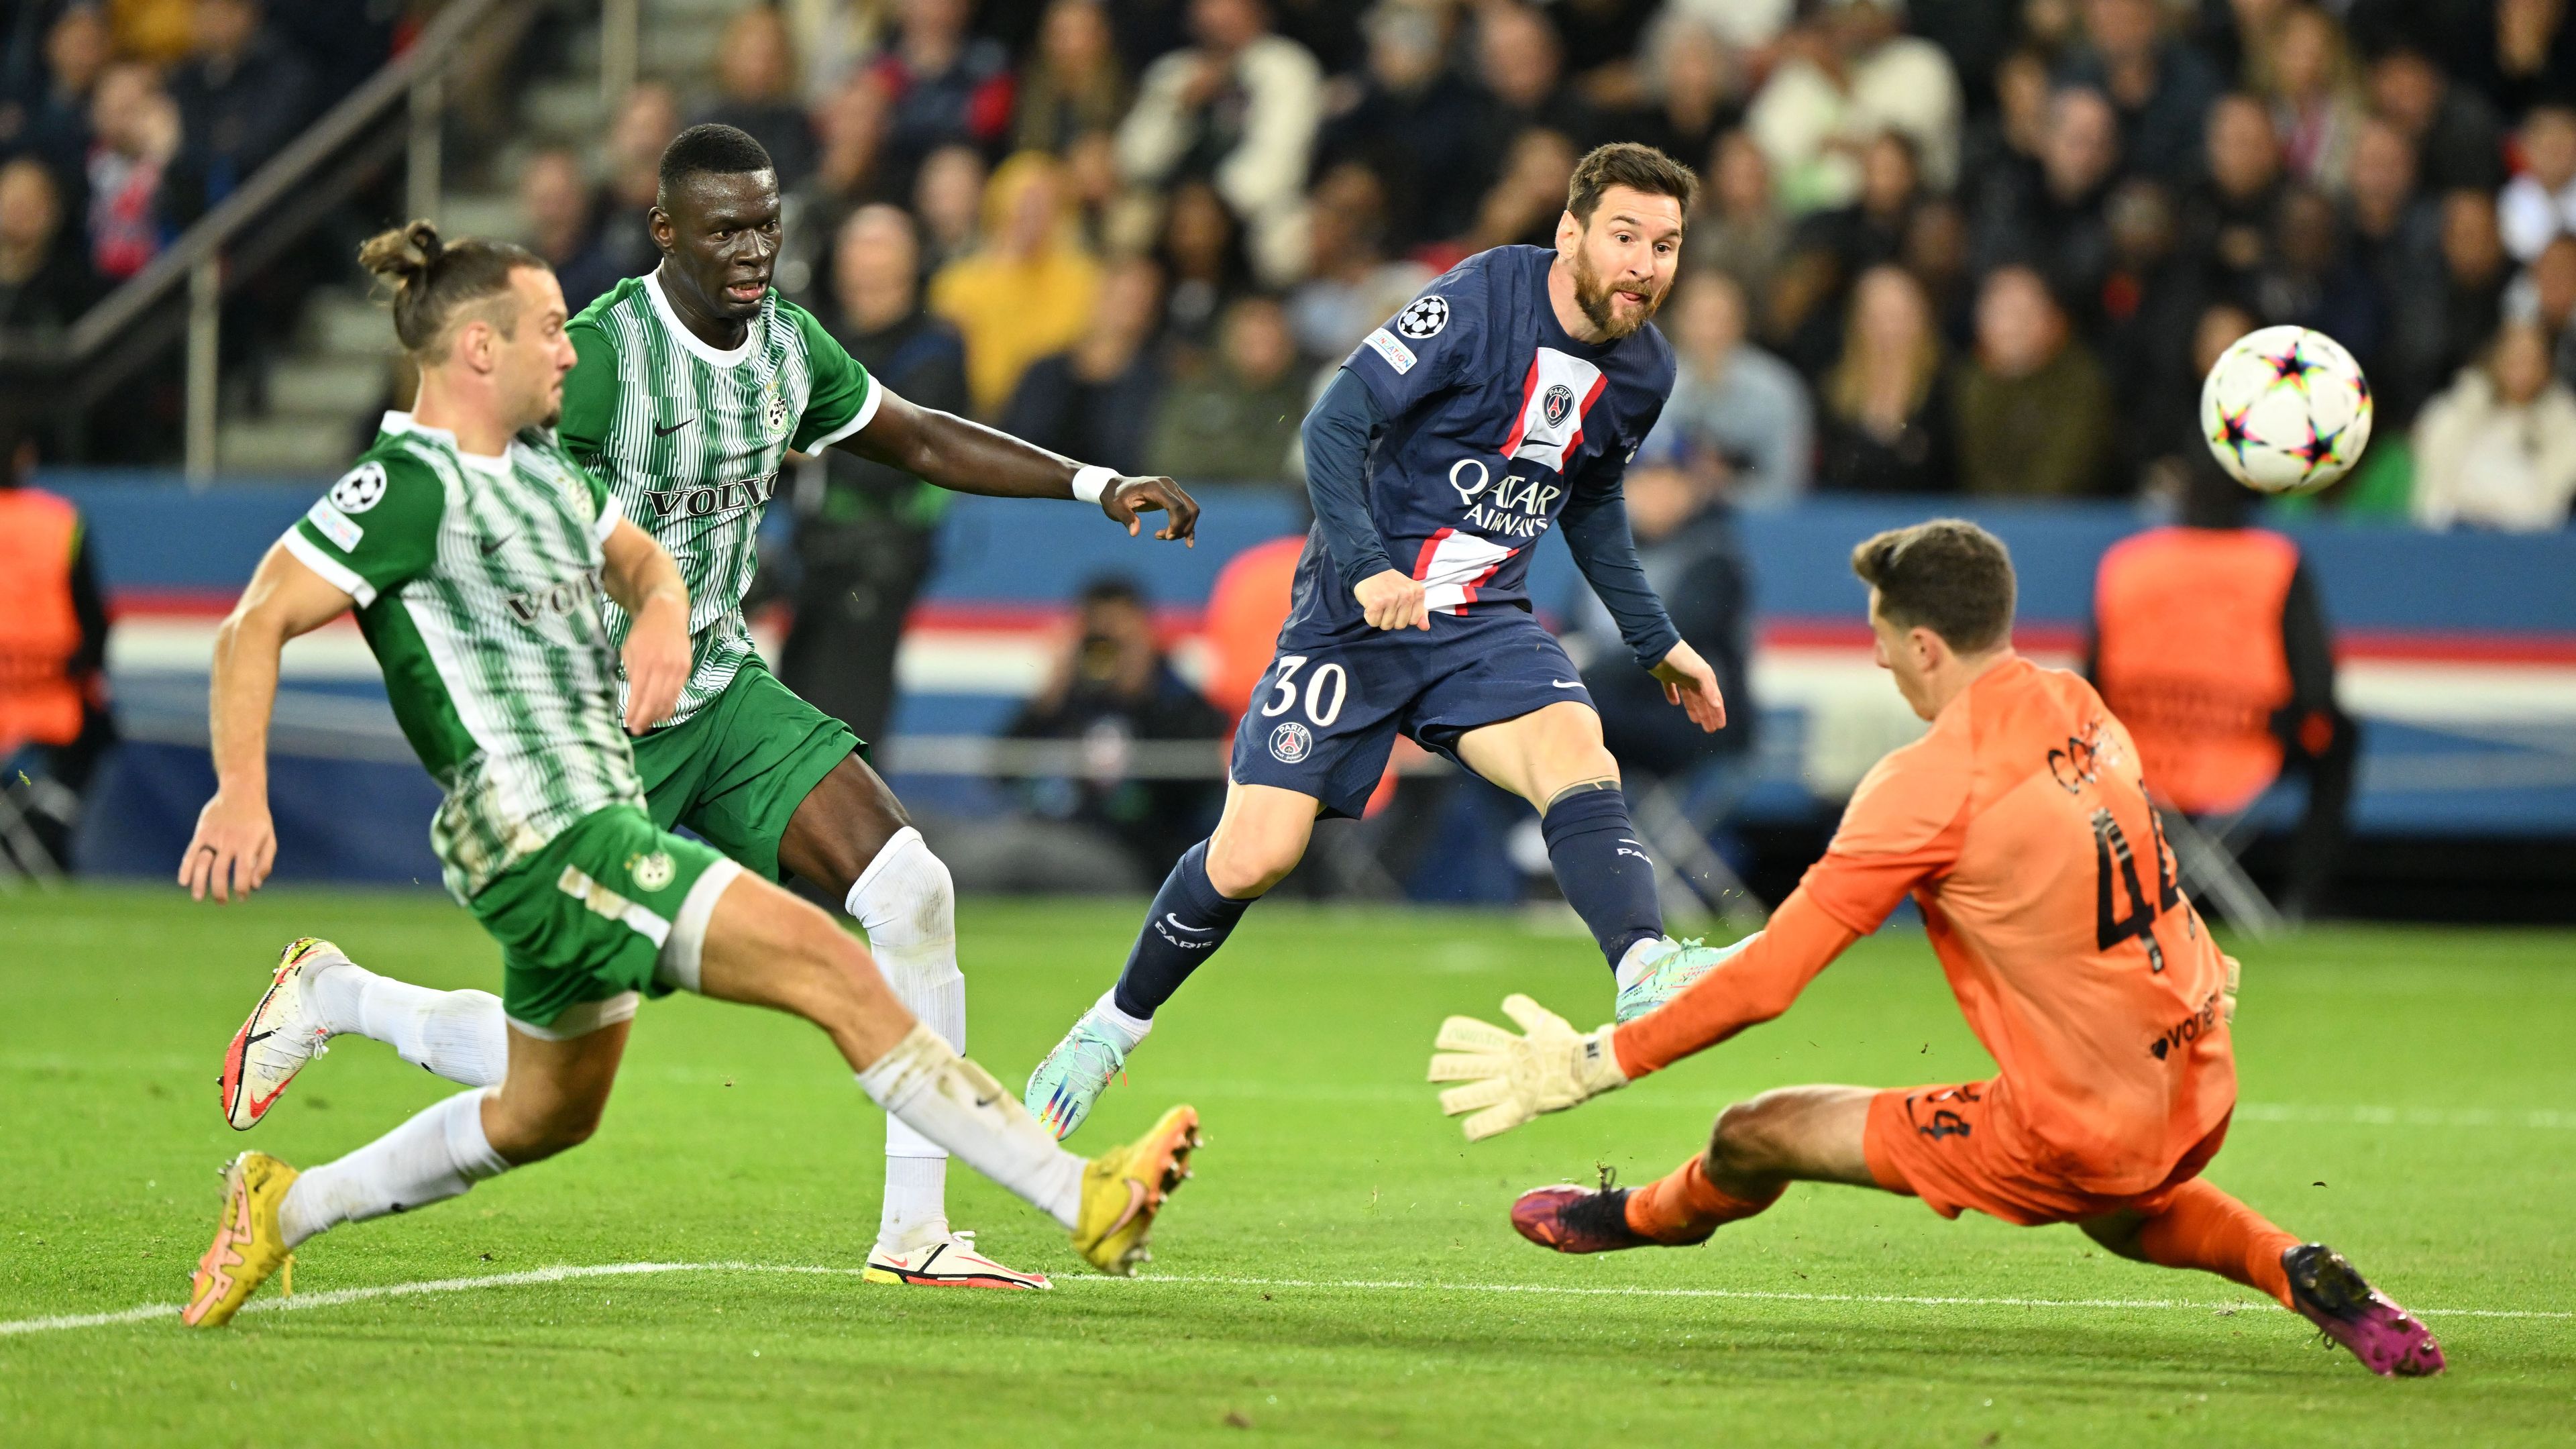 Lionel Messi (second from right) in action during the UEFA Champions League soccer match between Paris Saint-Germain and Maccabi Haifa FC at Parc des Princes stadium in Paris, France.